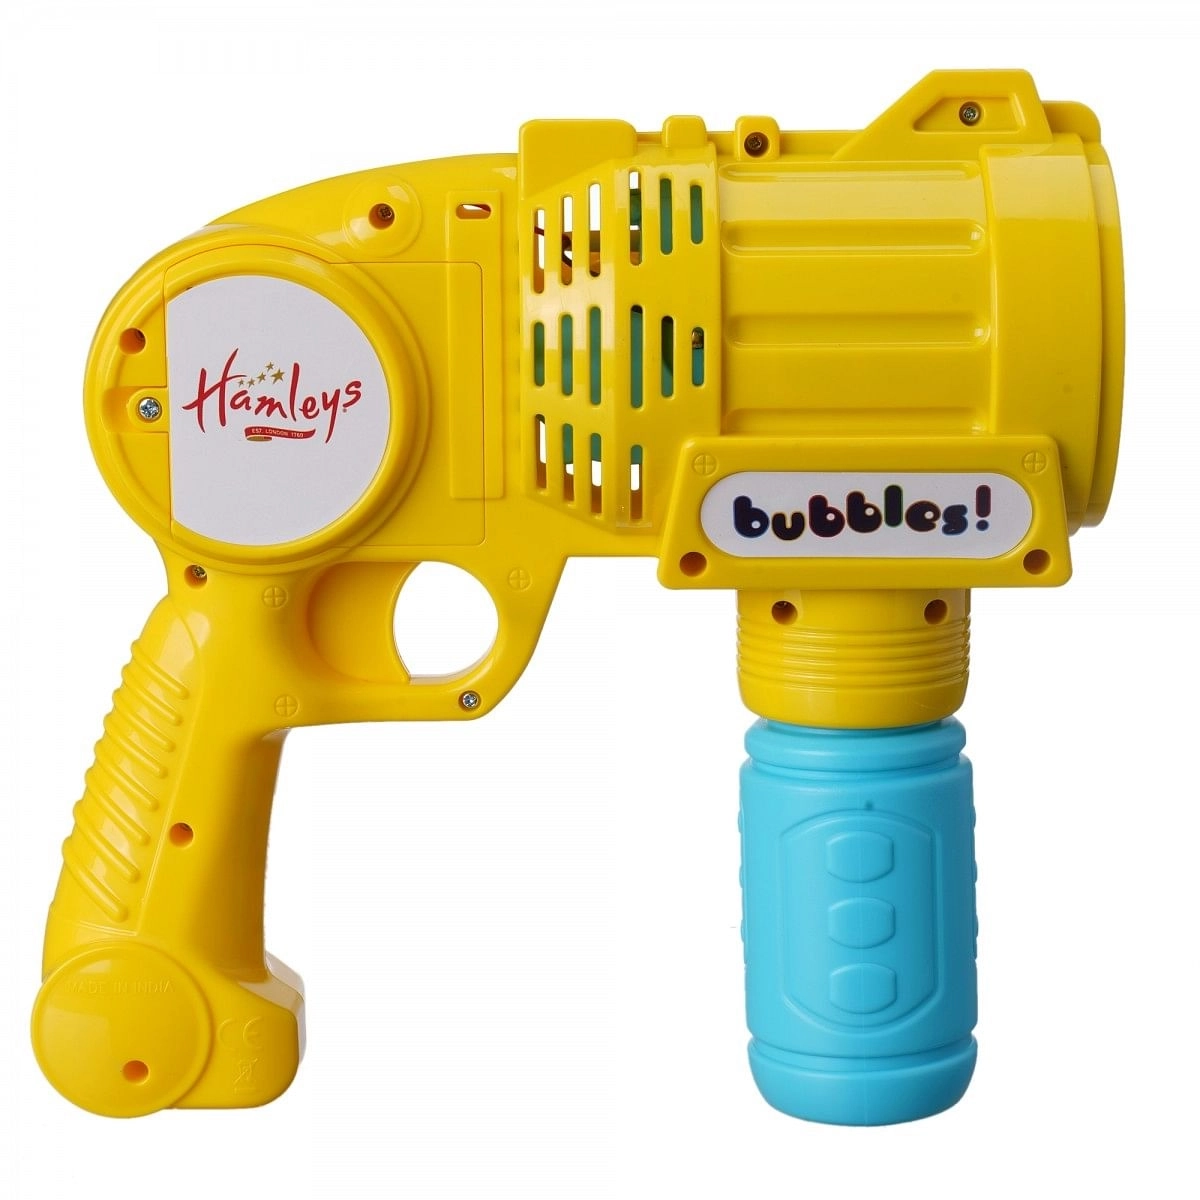 Hamleys Bubble Blaster with LED Light & 110 ml Bubble Solution, Impulse Toys for Kids, Yellow, 3Y+